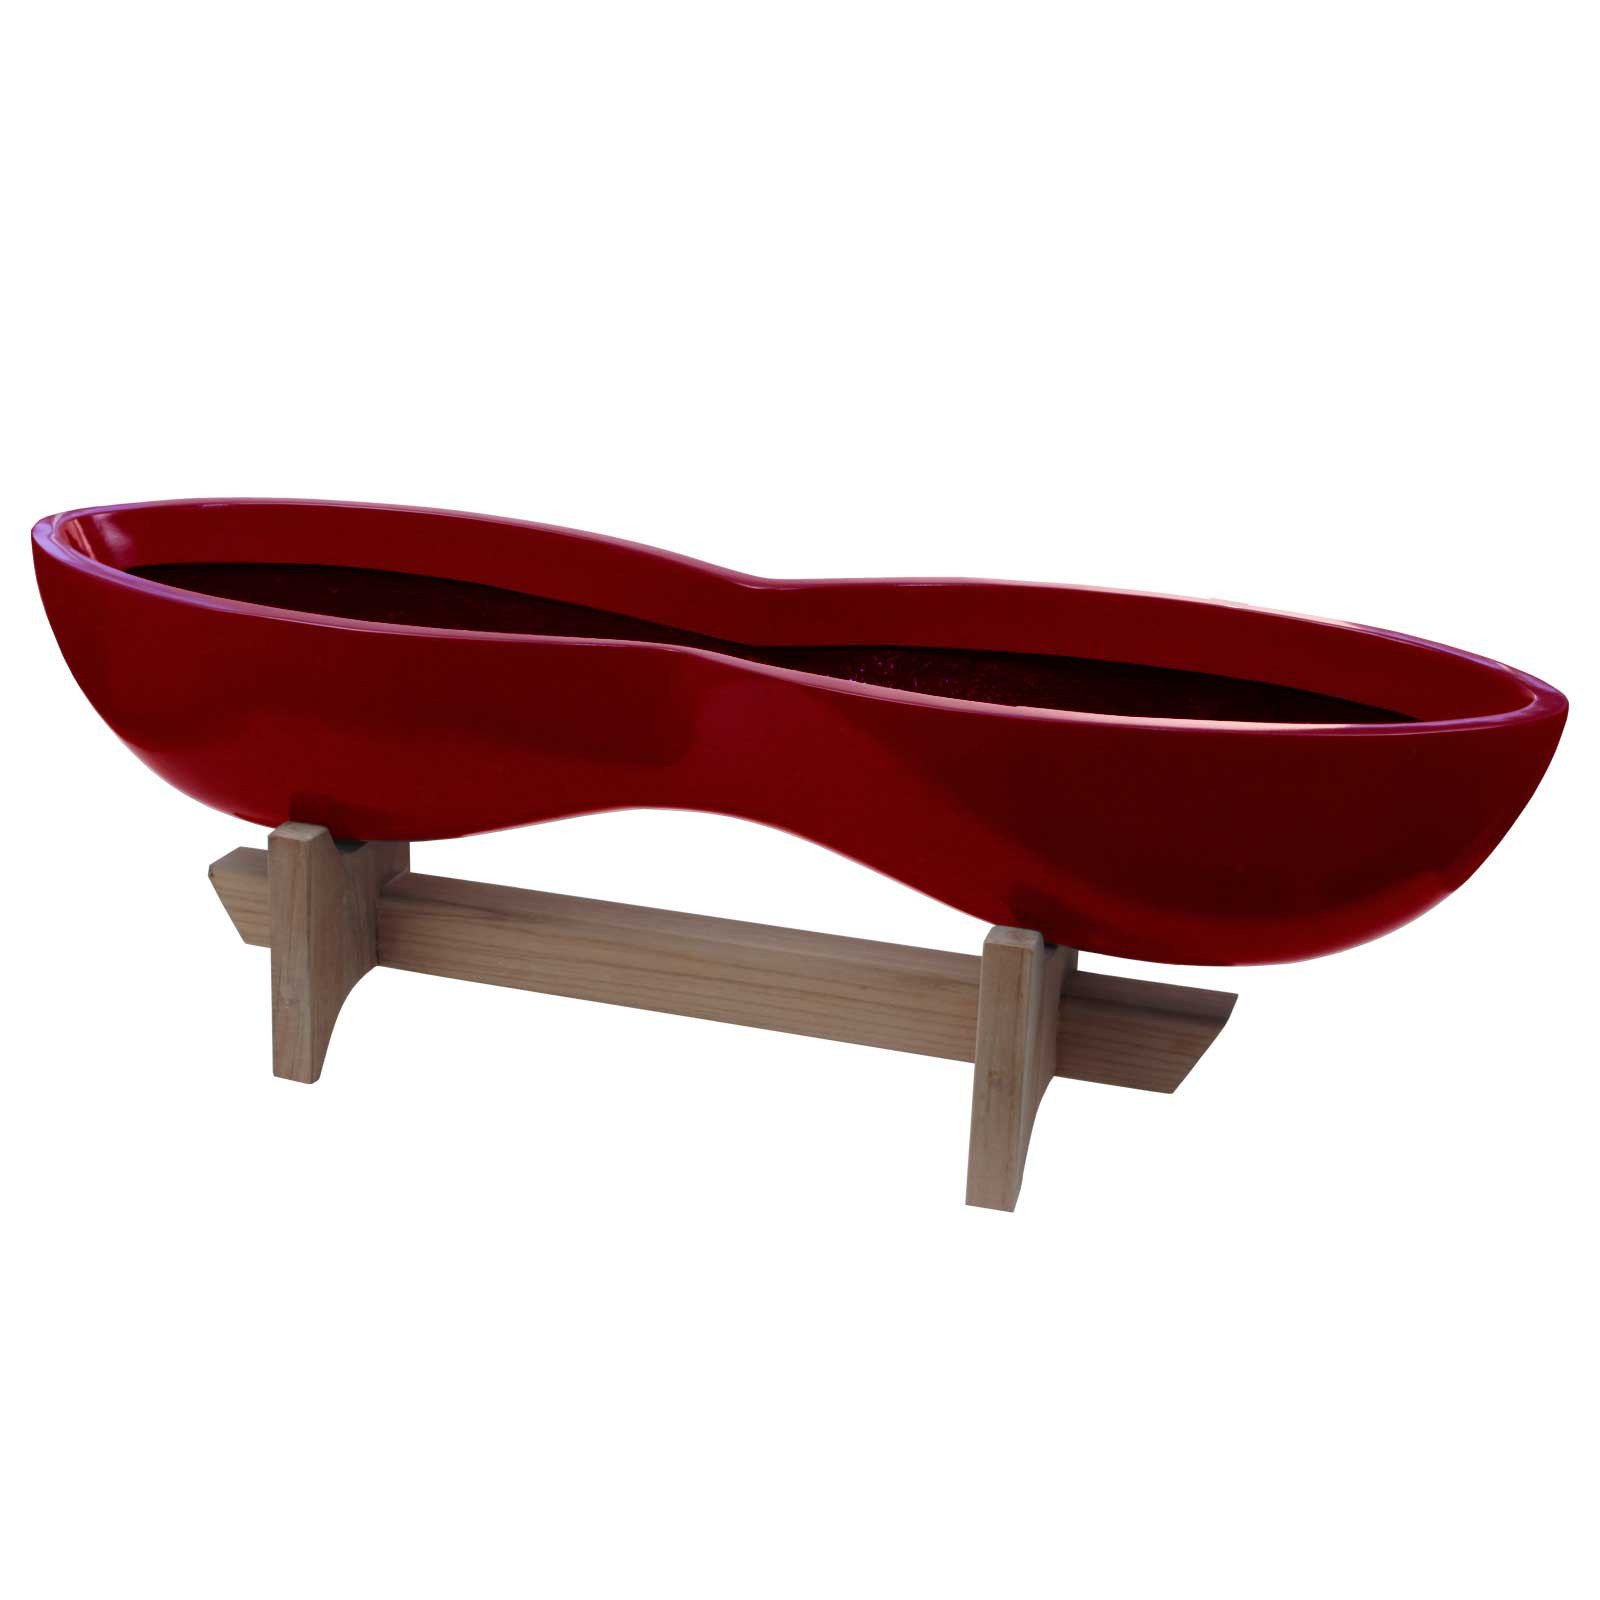 Timbrell Curved Tabletop Planter